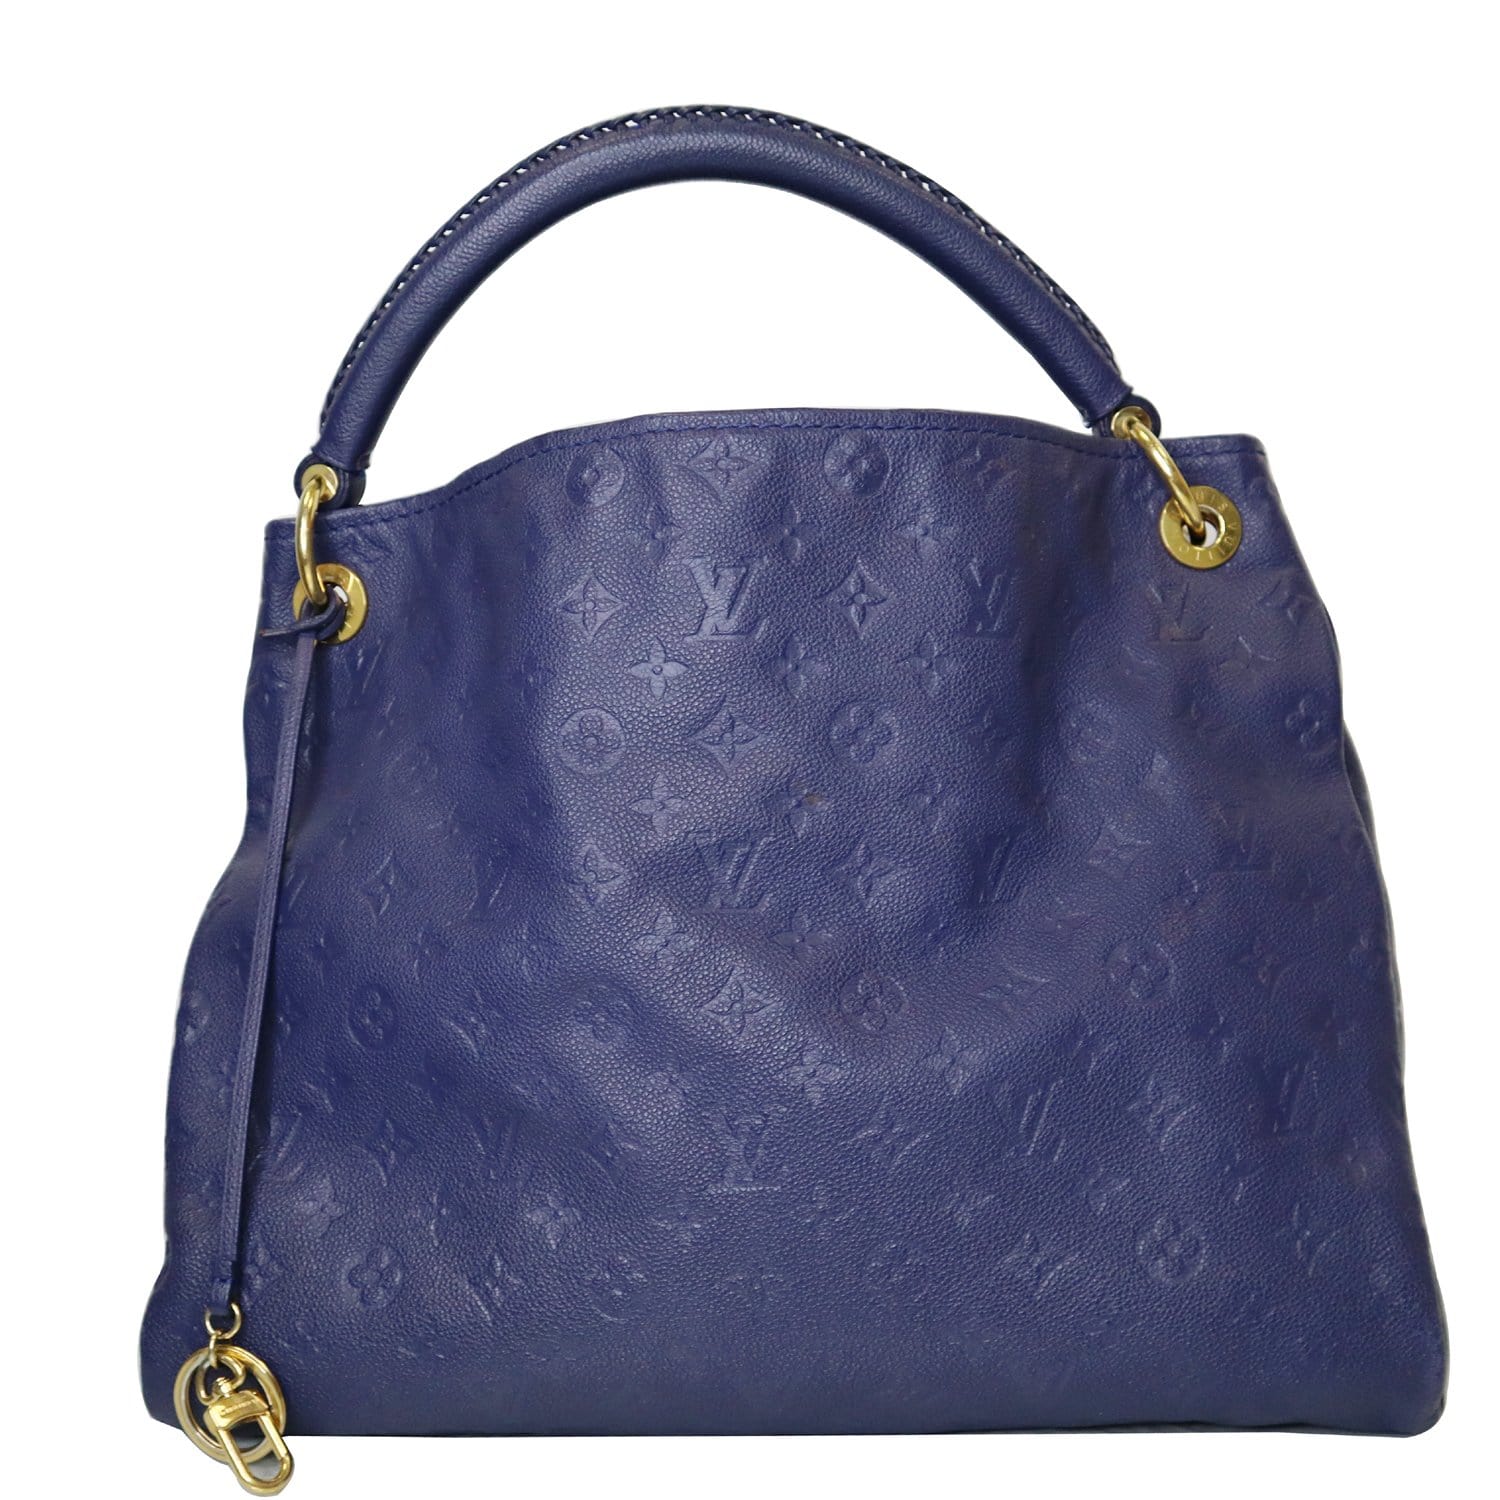 Louis Vuitton Artsy MM Monogram Empreinte Navy and Red Tote Bag at